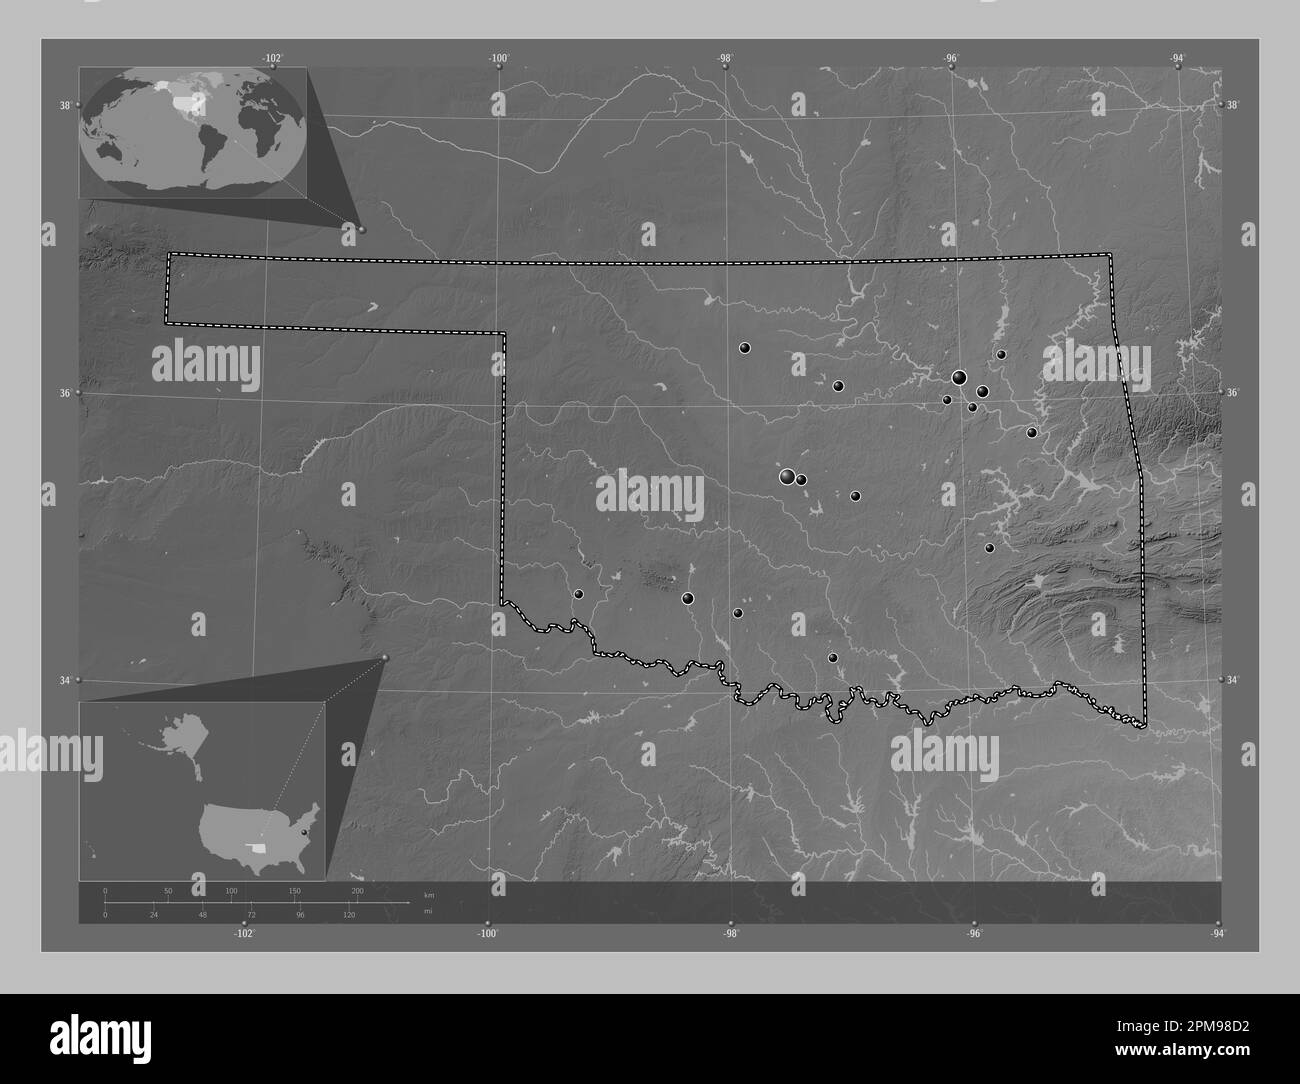 Oklahoma, state of United States of America. Grayscale elevation map with lakes and rivers. Locations of major cities of the region. Corner auxiliary Stock Photo